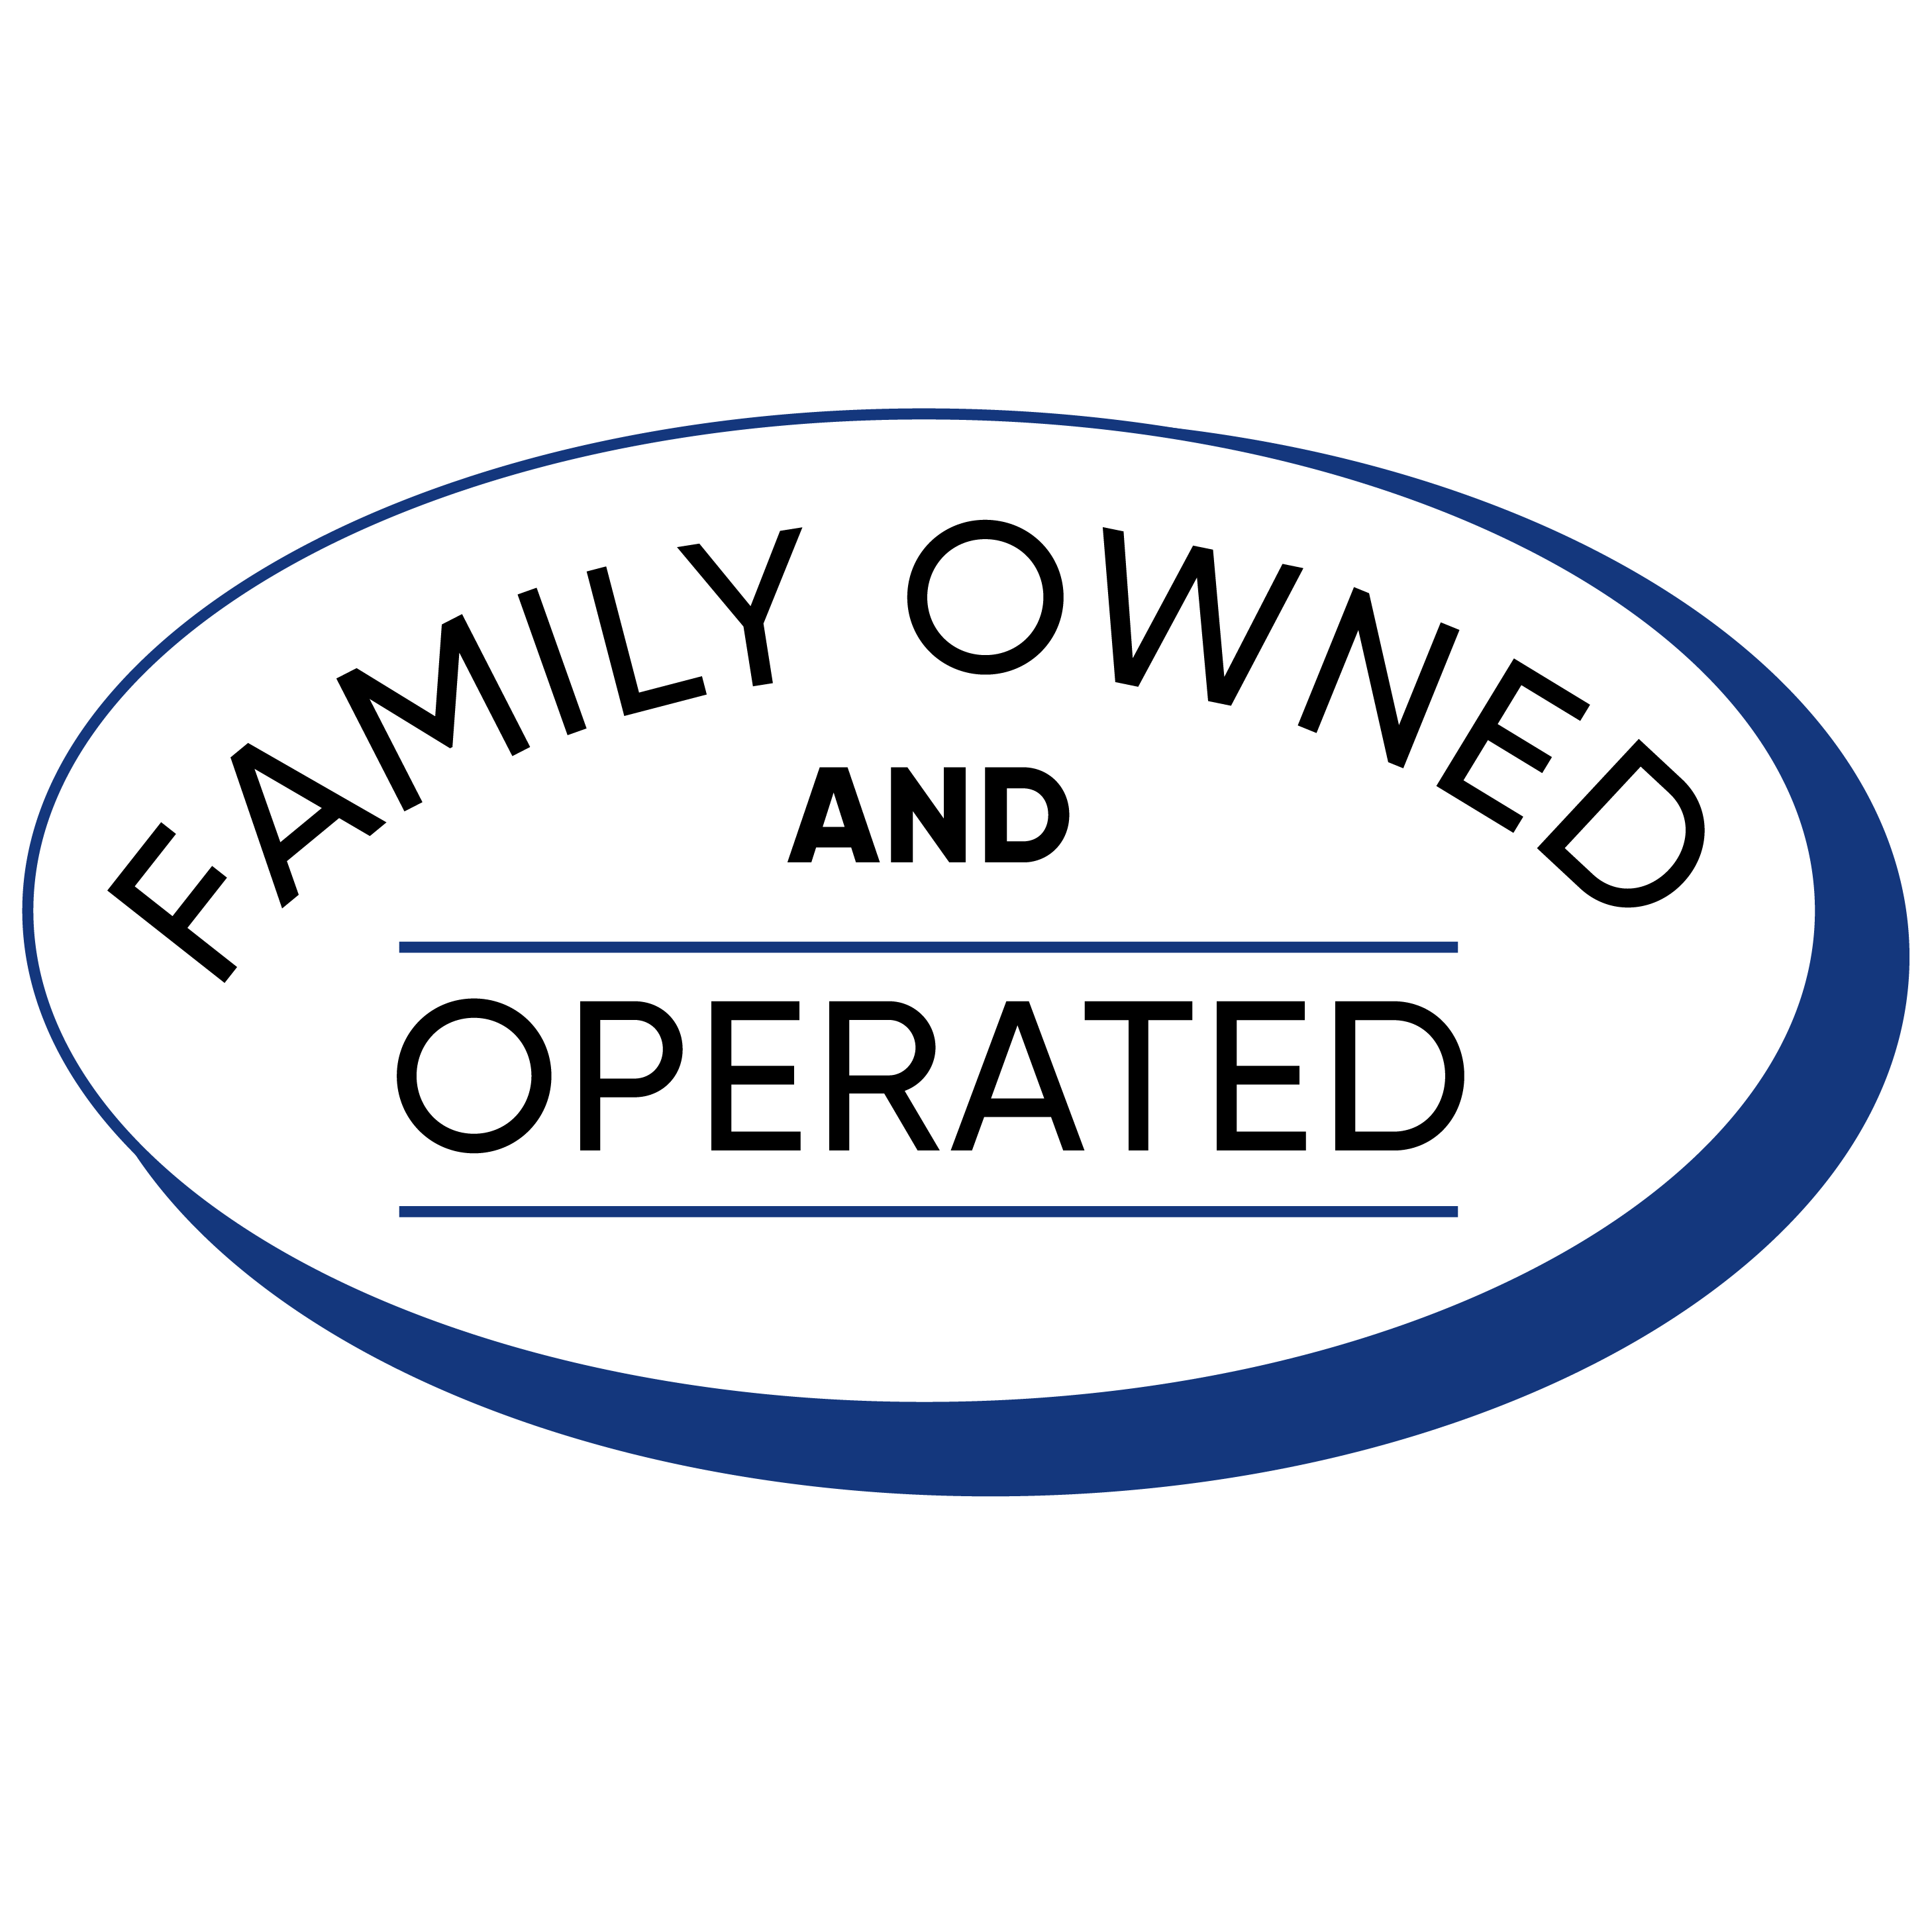 Family owned and operated badge